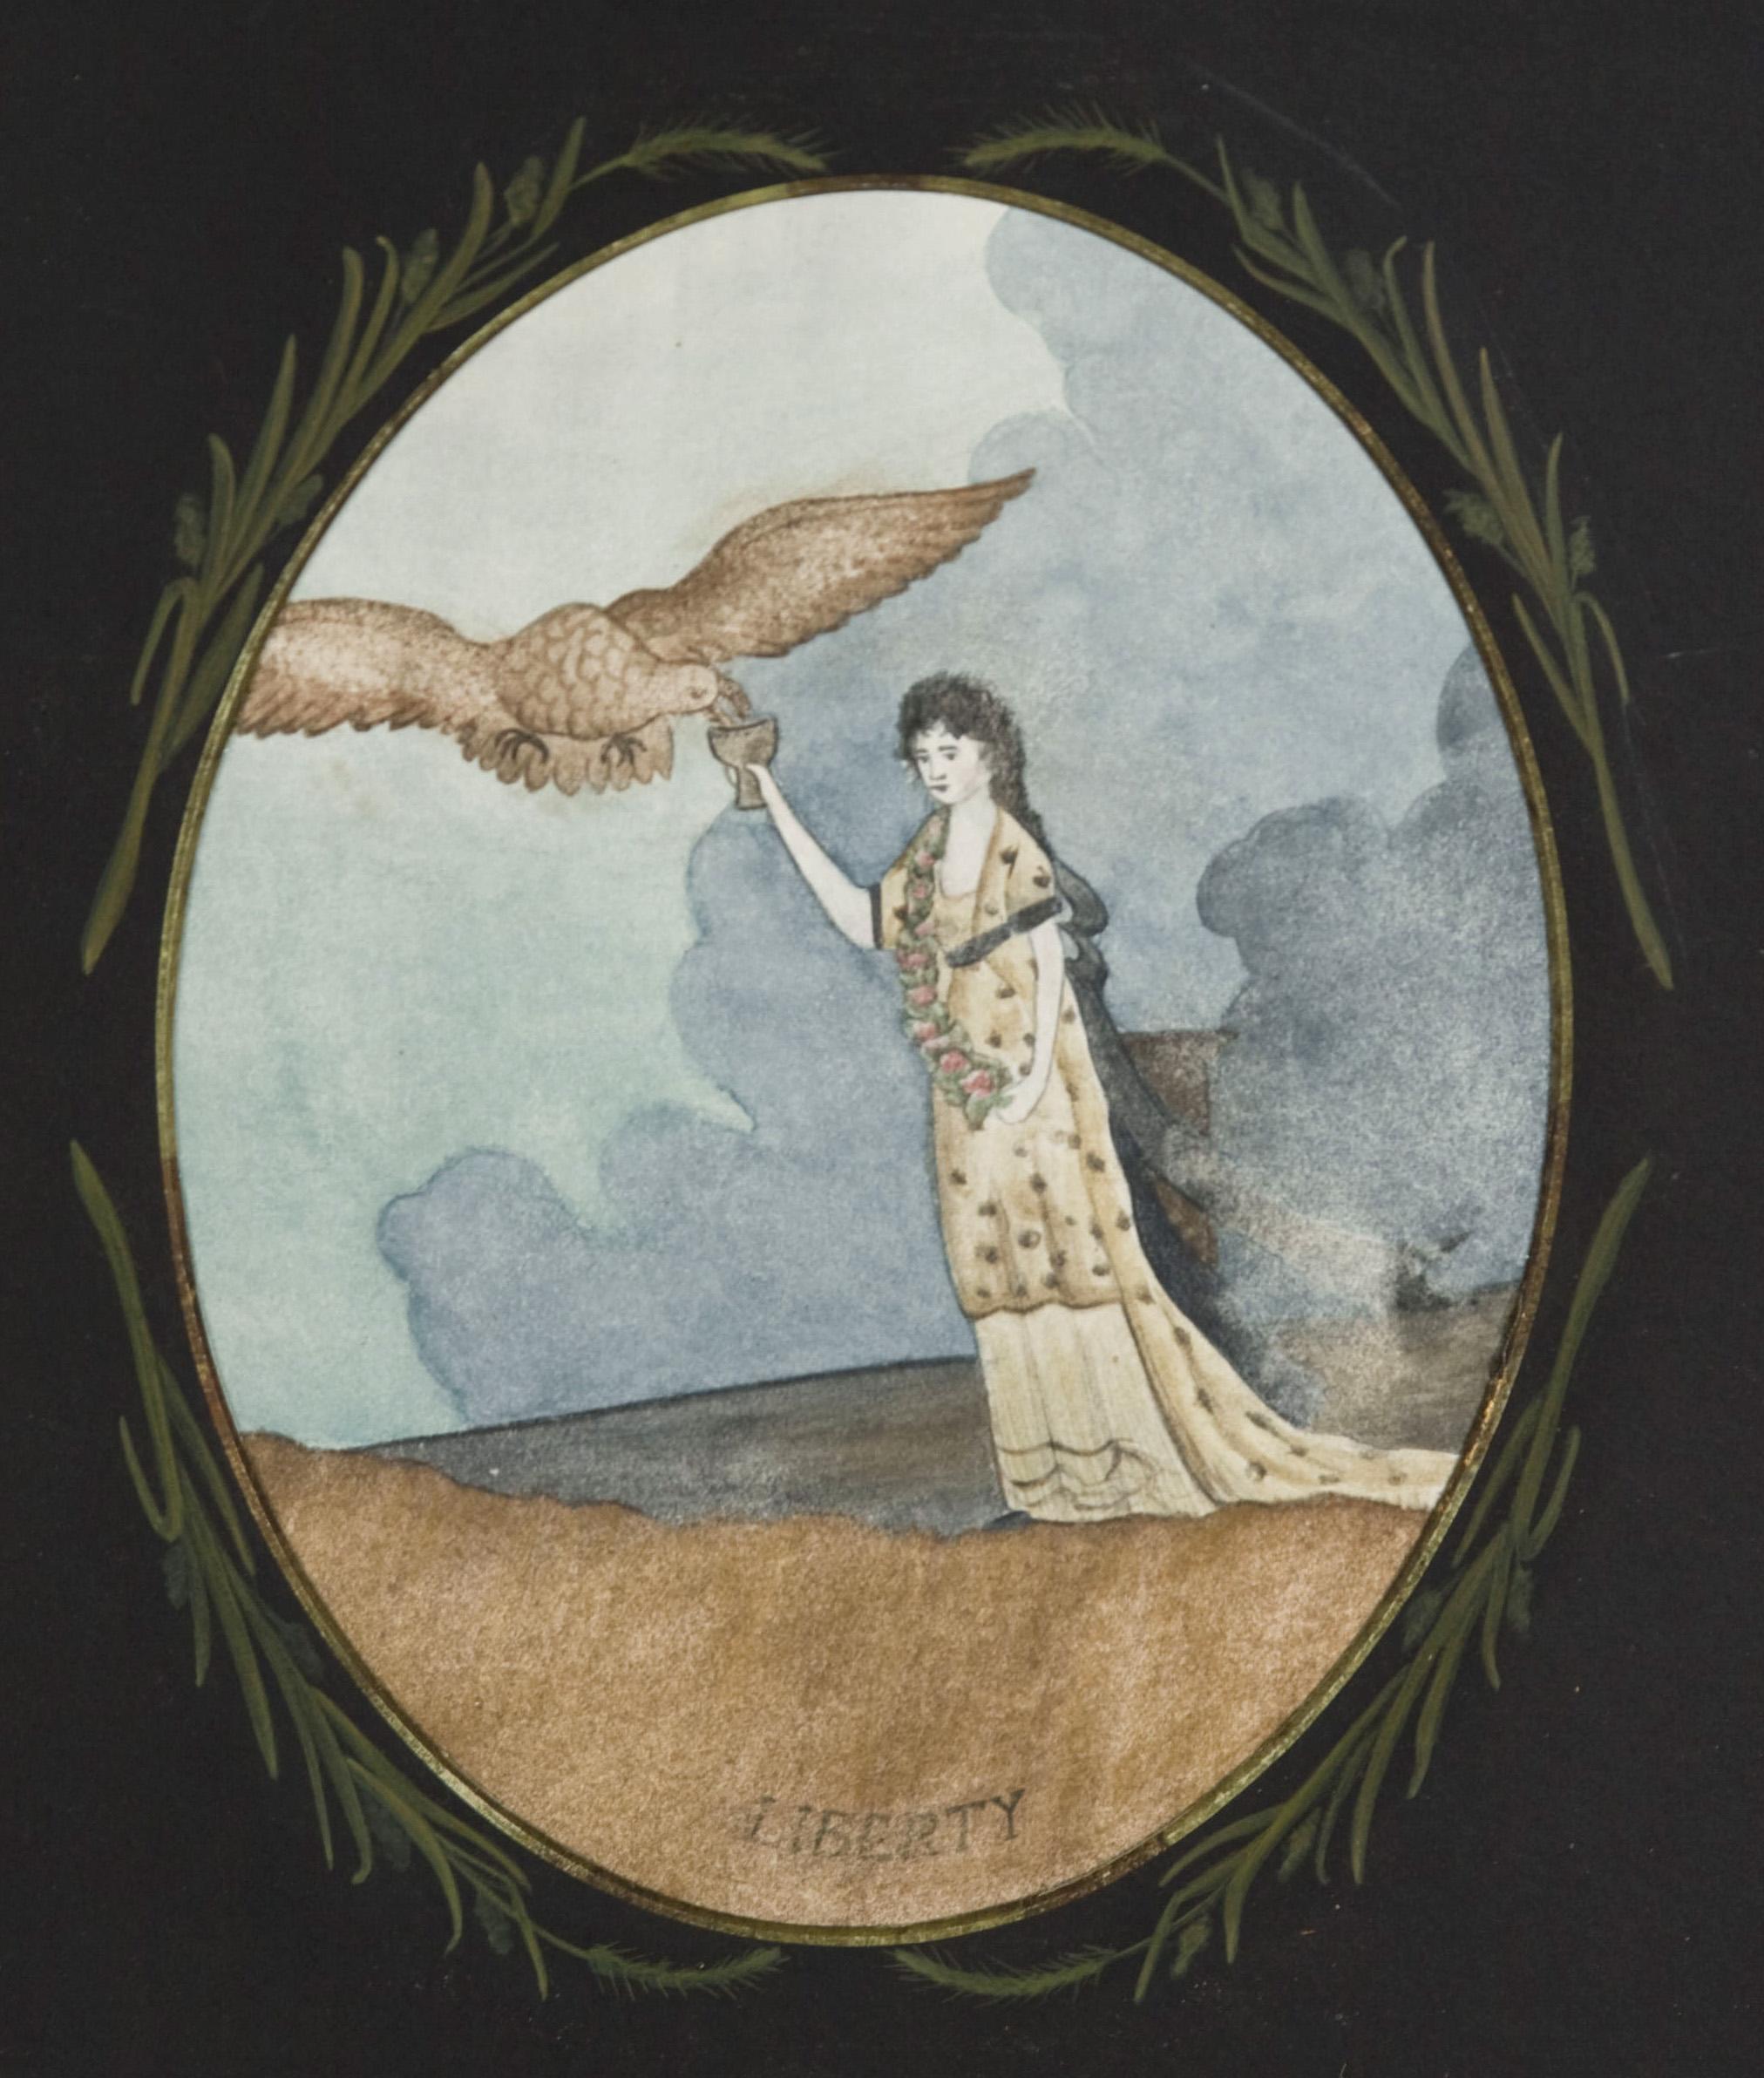 THE AMERICAN EAGLE DRINKS FROM THE GOBLET OF LIFE, IN THE HAND OF LADY LIBERTY: EARLY WATERCOLOR ON PAPER IN A SPECTACULAR, THREE-DIMENTIONAL, PUZZLE-WORK, TRAMP ART FRAME 

The Goddess of Liberty hands the Goblet of Life or the Holy Grail to the